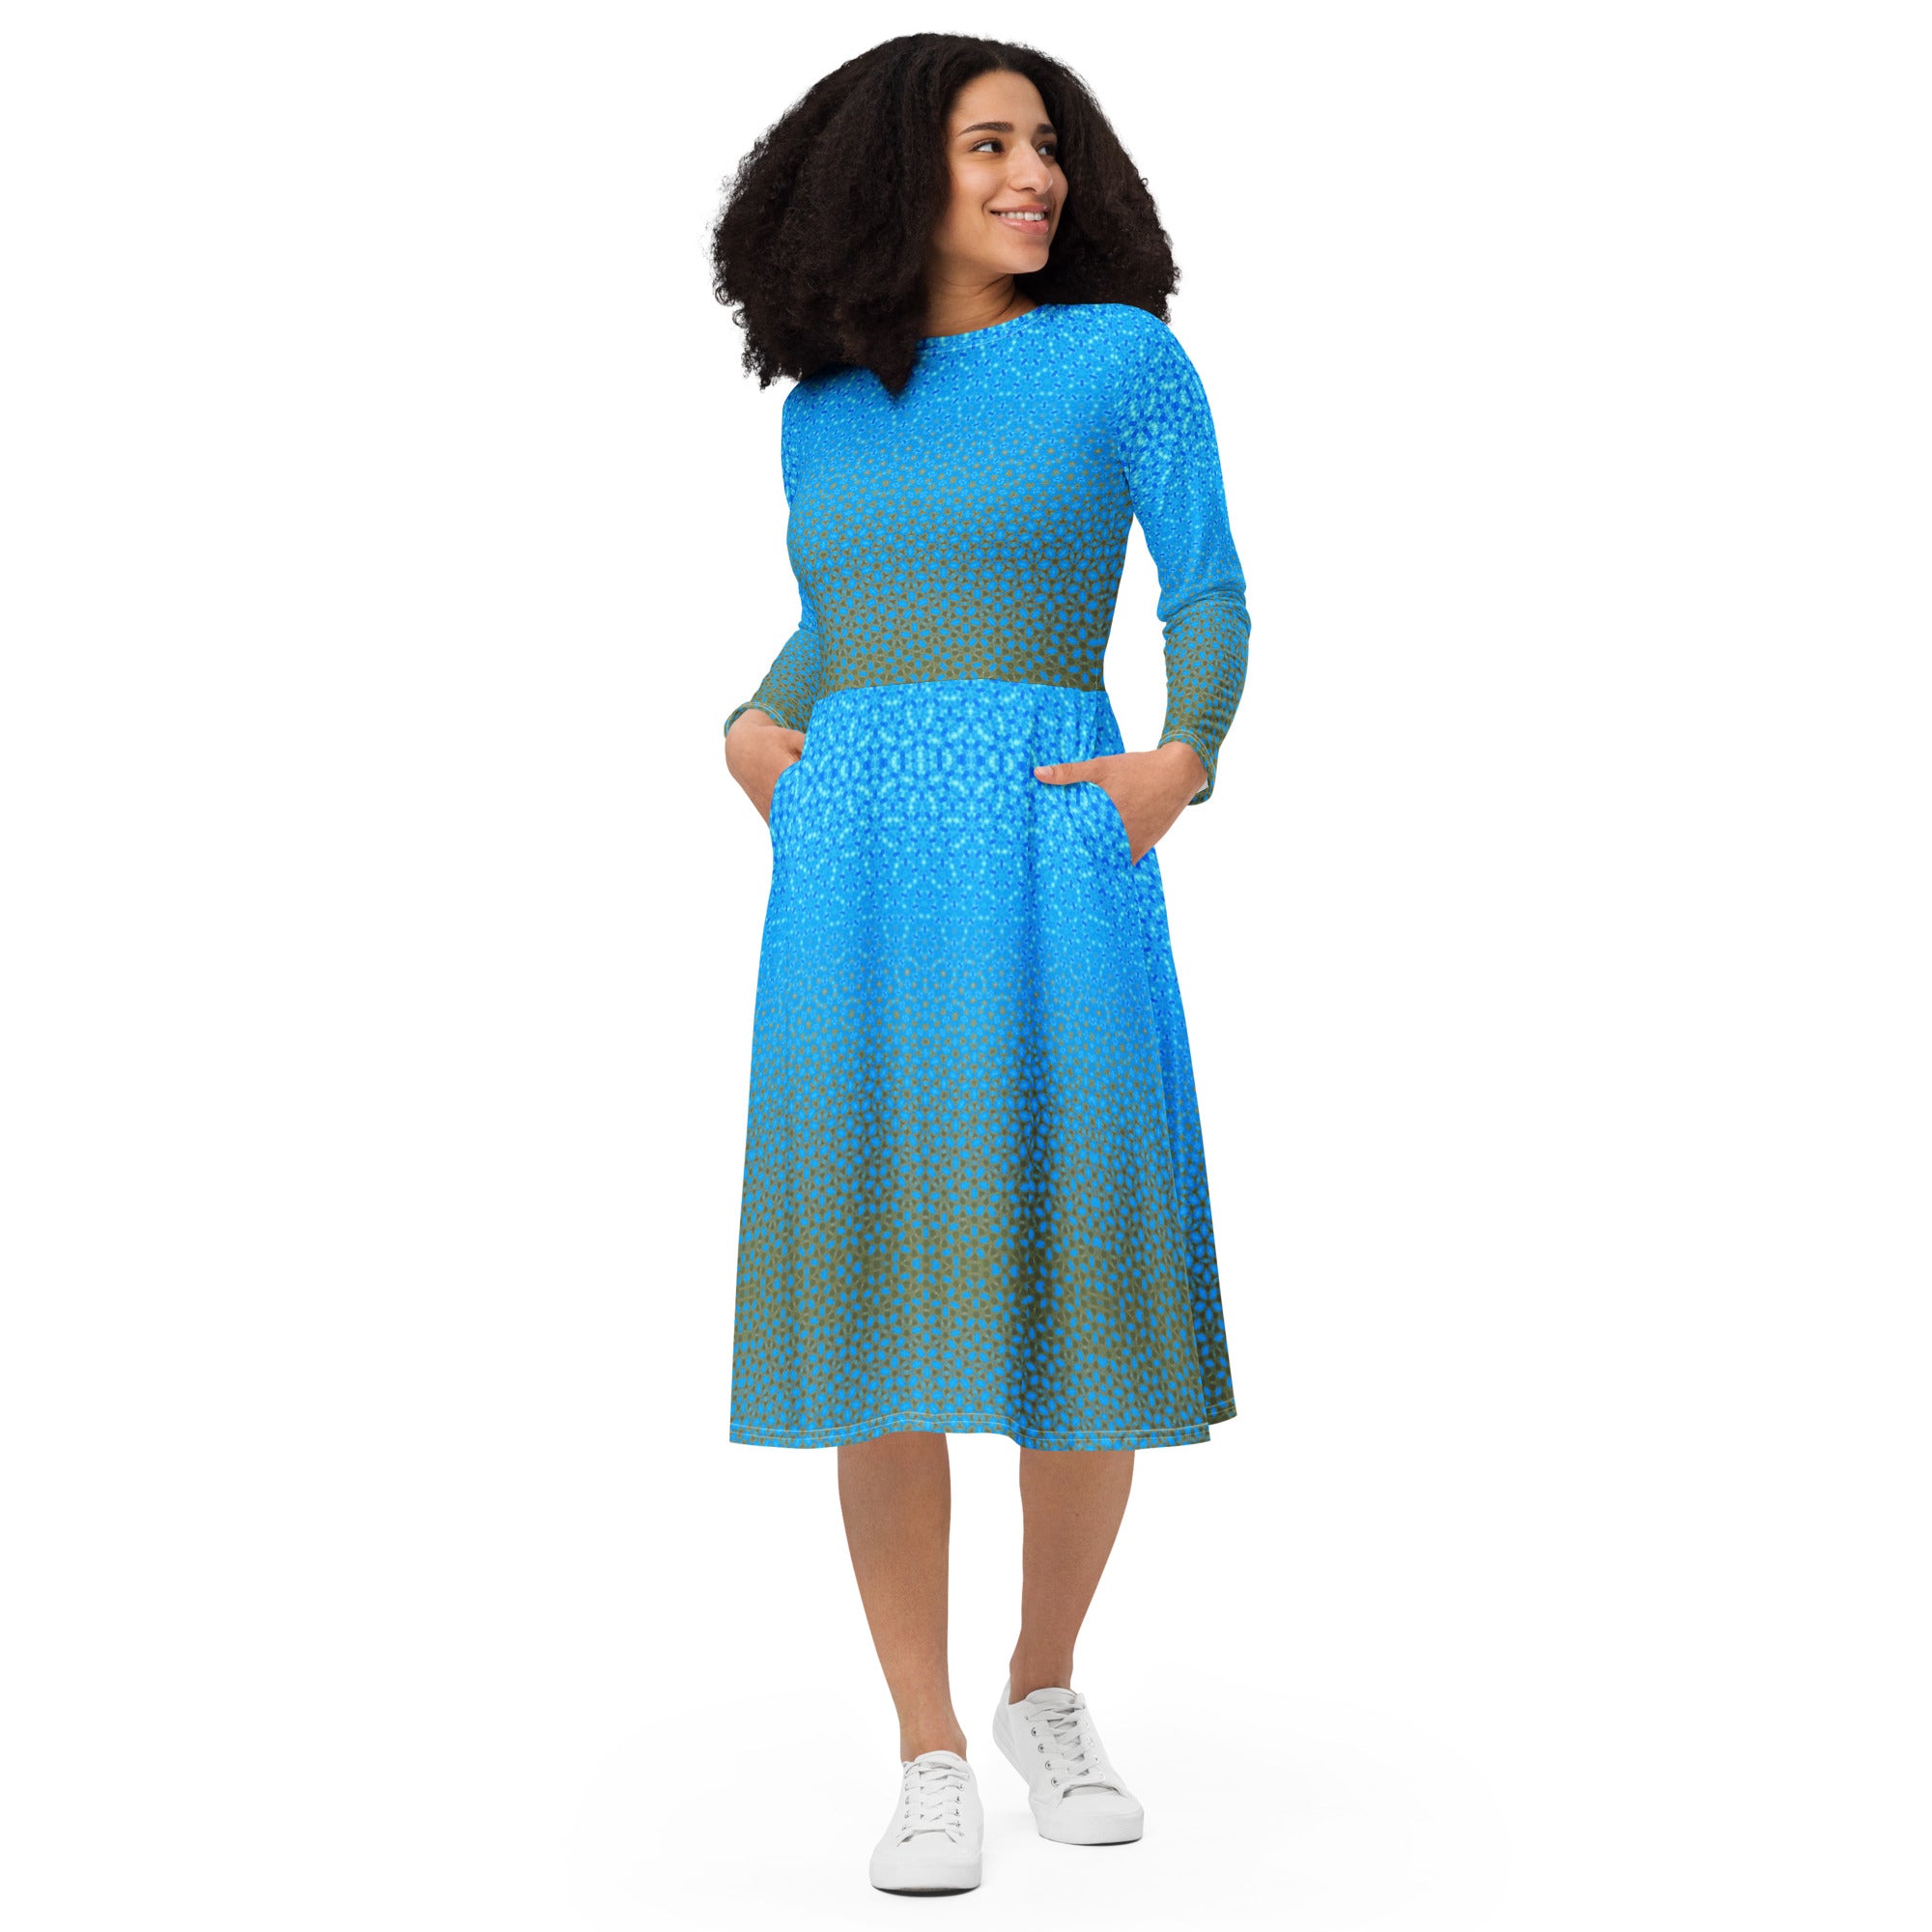 Scottish Sky and mountain colors patterned  long sleeve midi dress, by Sensus Studio Design